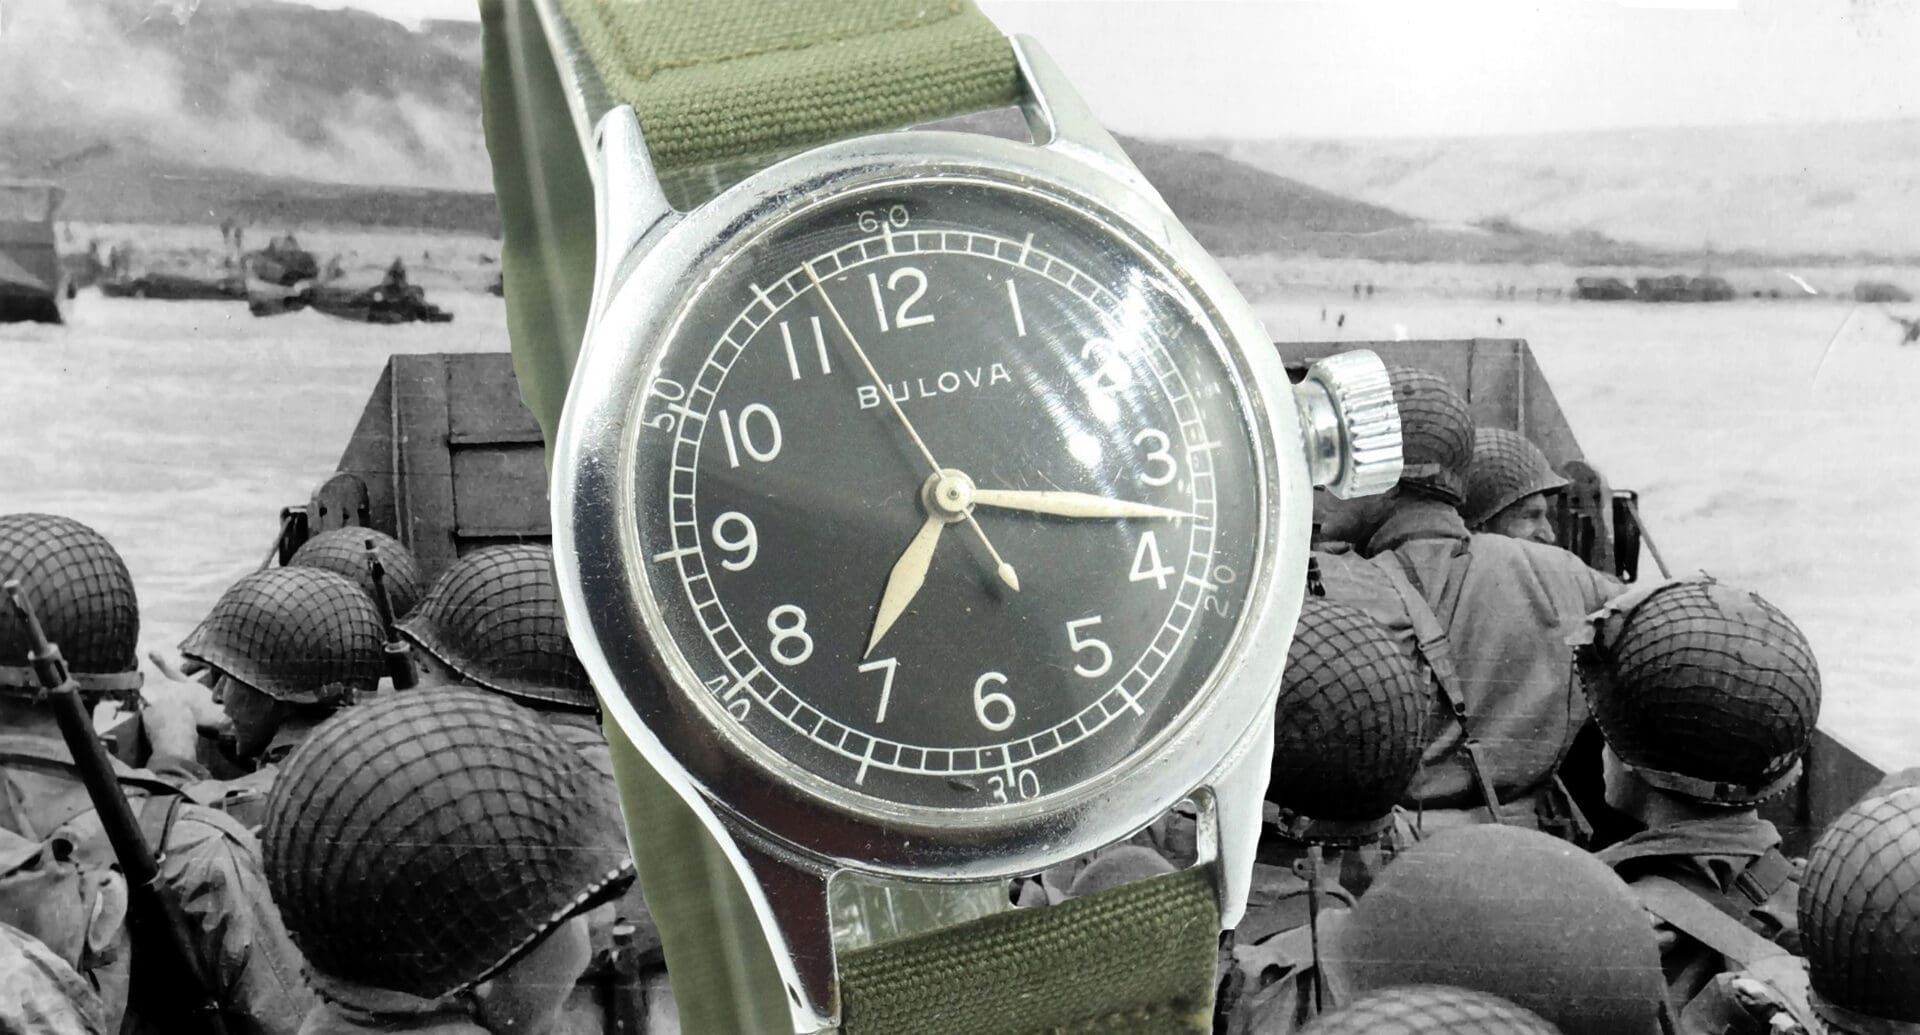 IN-DEPTH: The Bulova Hack watches and their military history